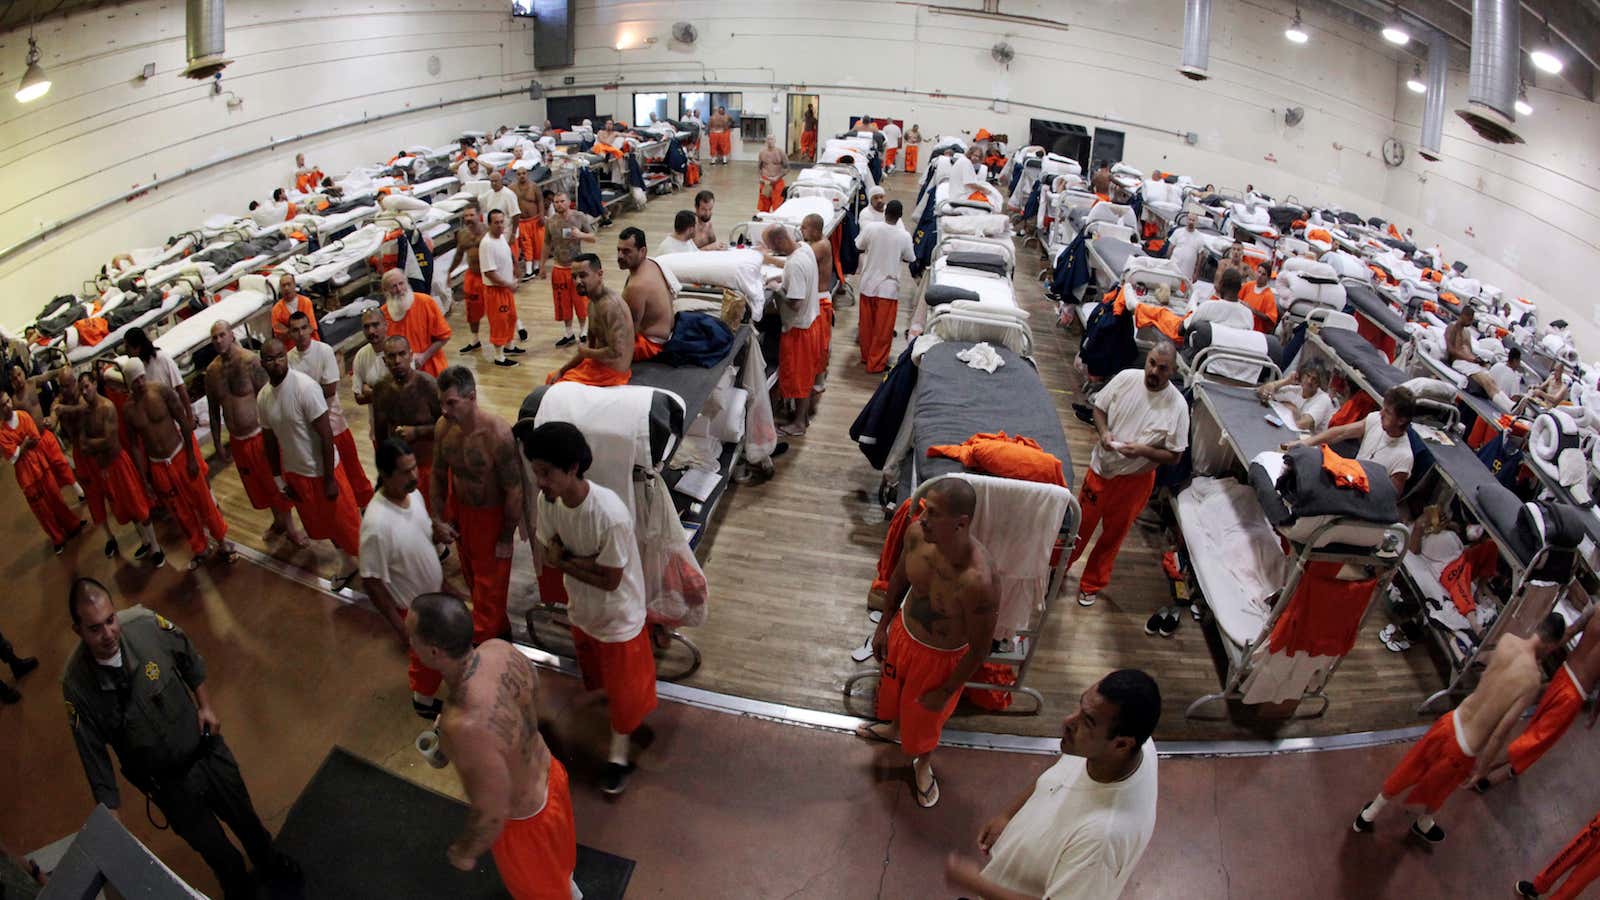 Inmates walk around a gymnasium where they are housed due to overcrowding at the California Institution for Men state prison in Chino, California, June 3,…